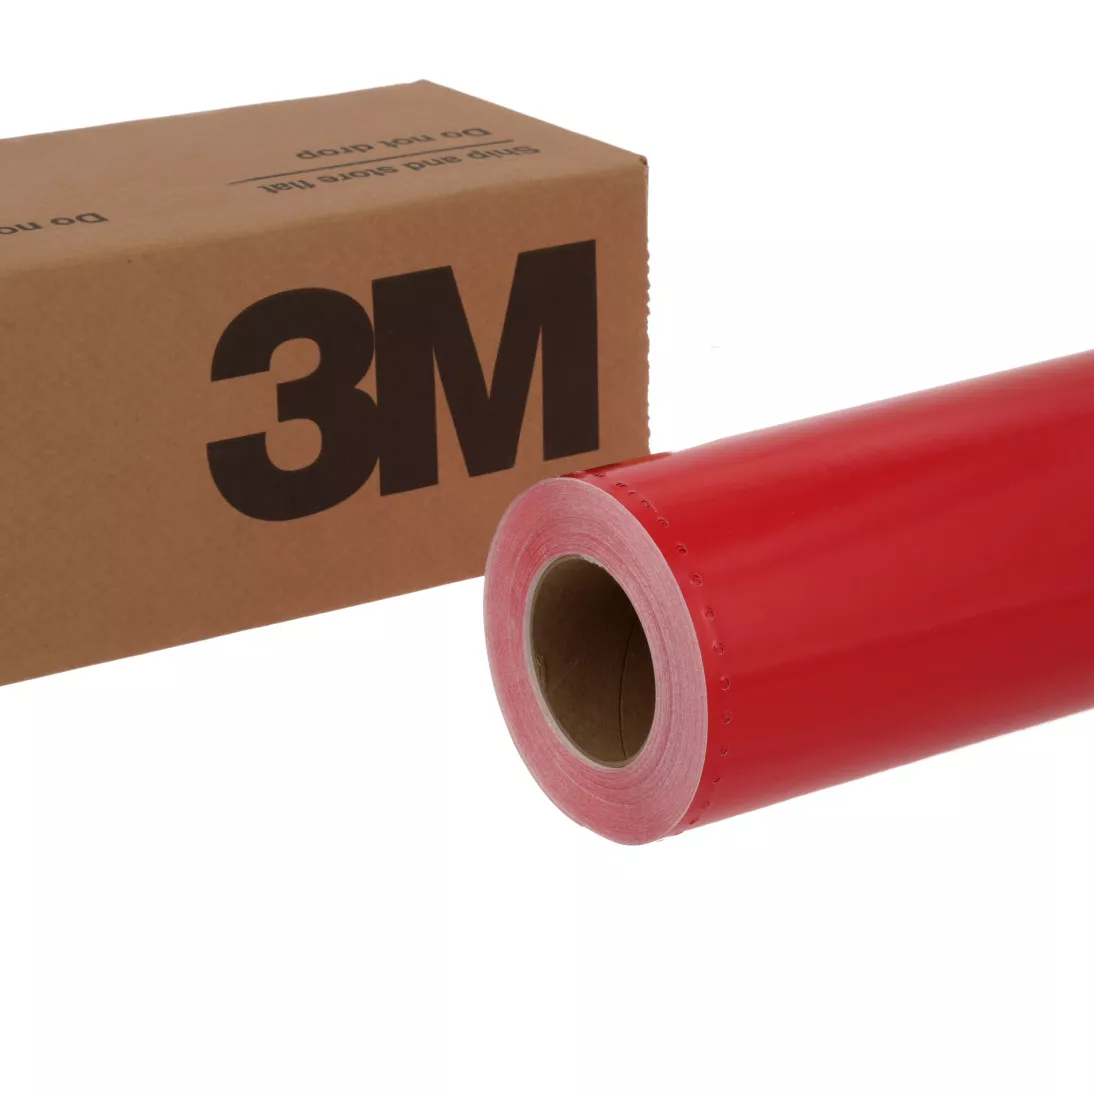 3M™ Scotchcal™ Translucent Graphic Film 3630-2294, Red, 48 in x 50 yd